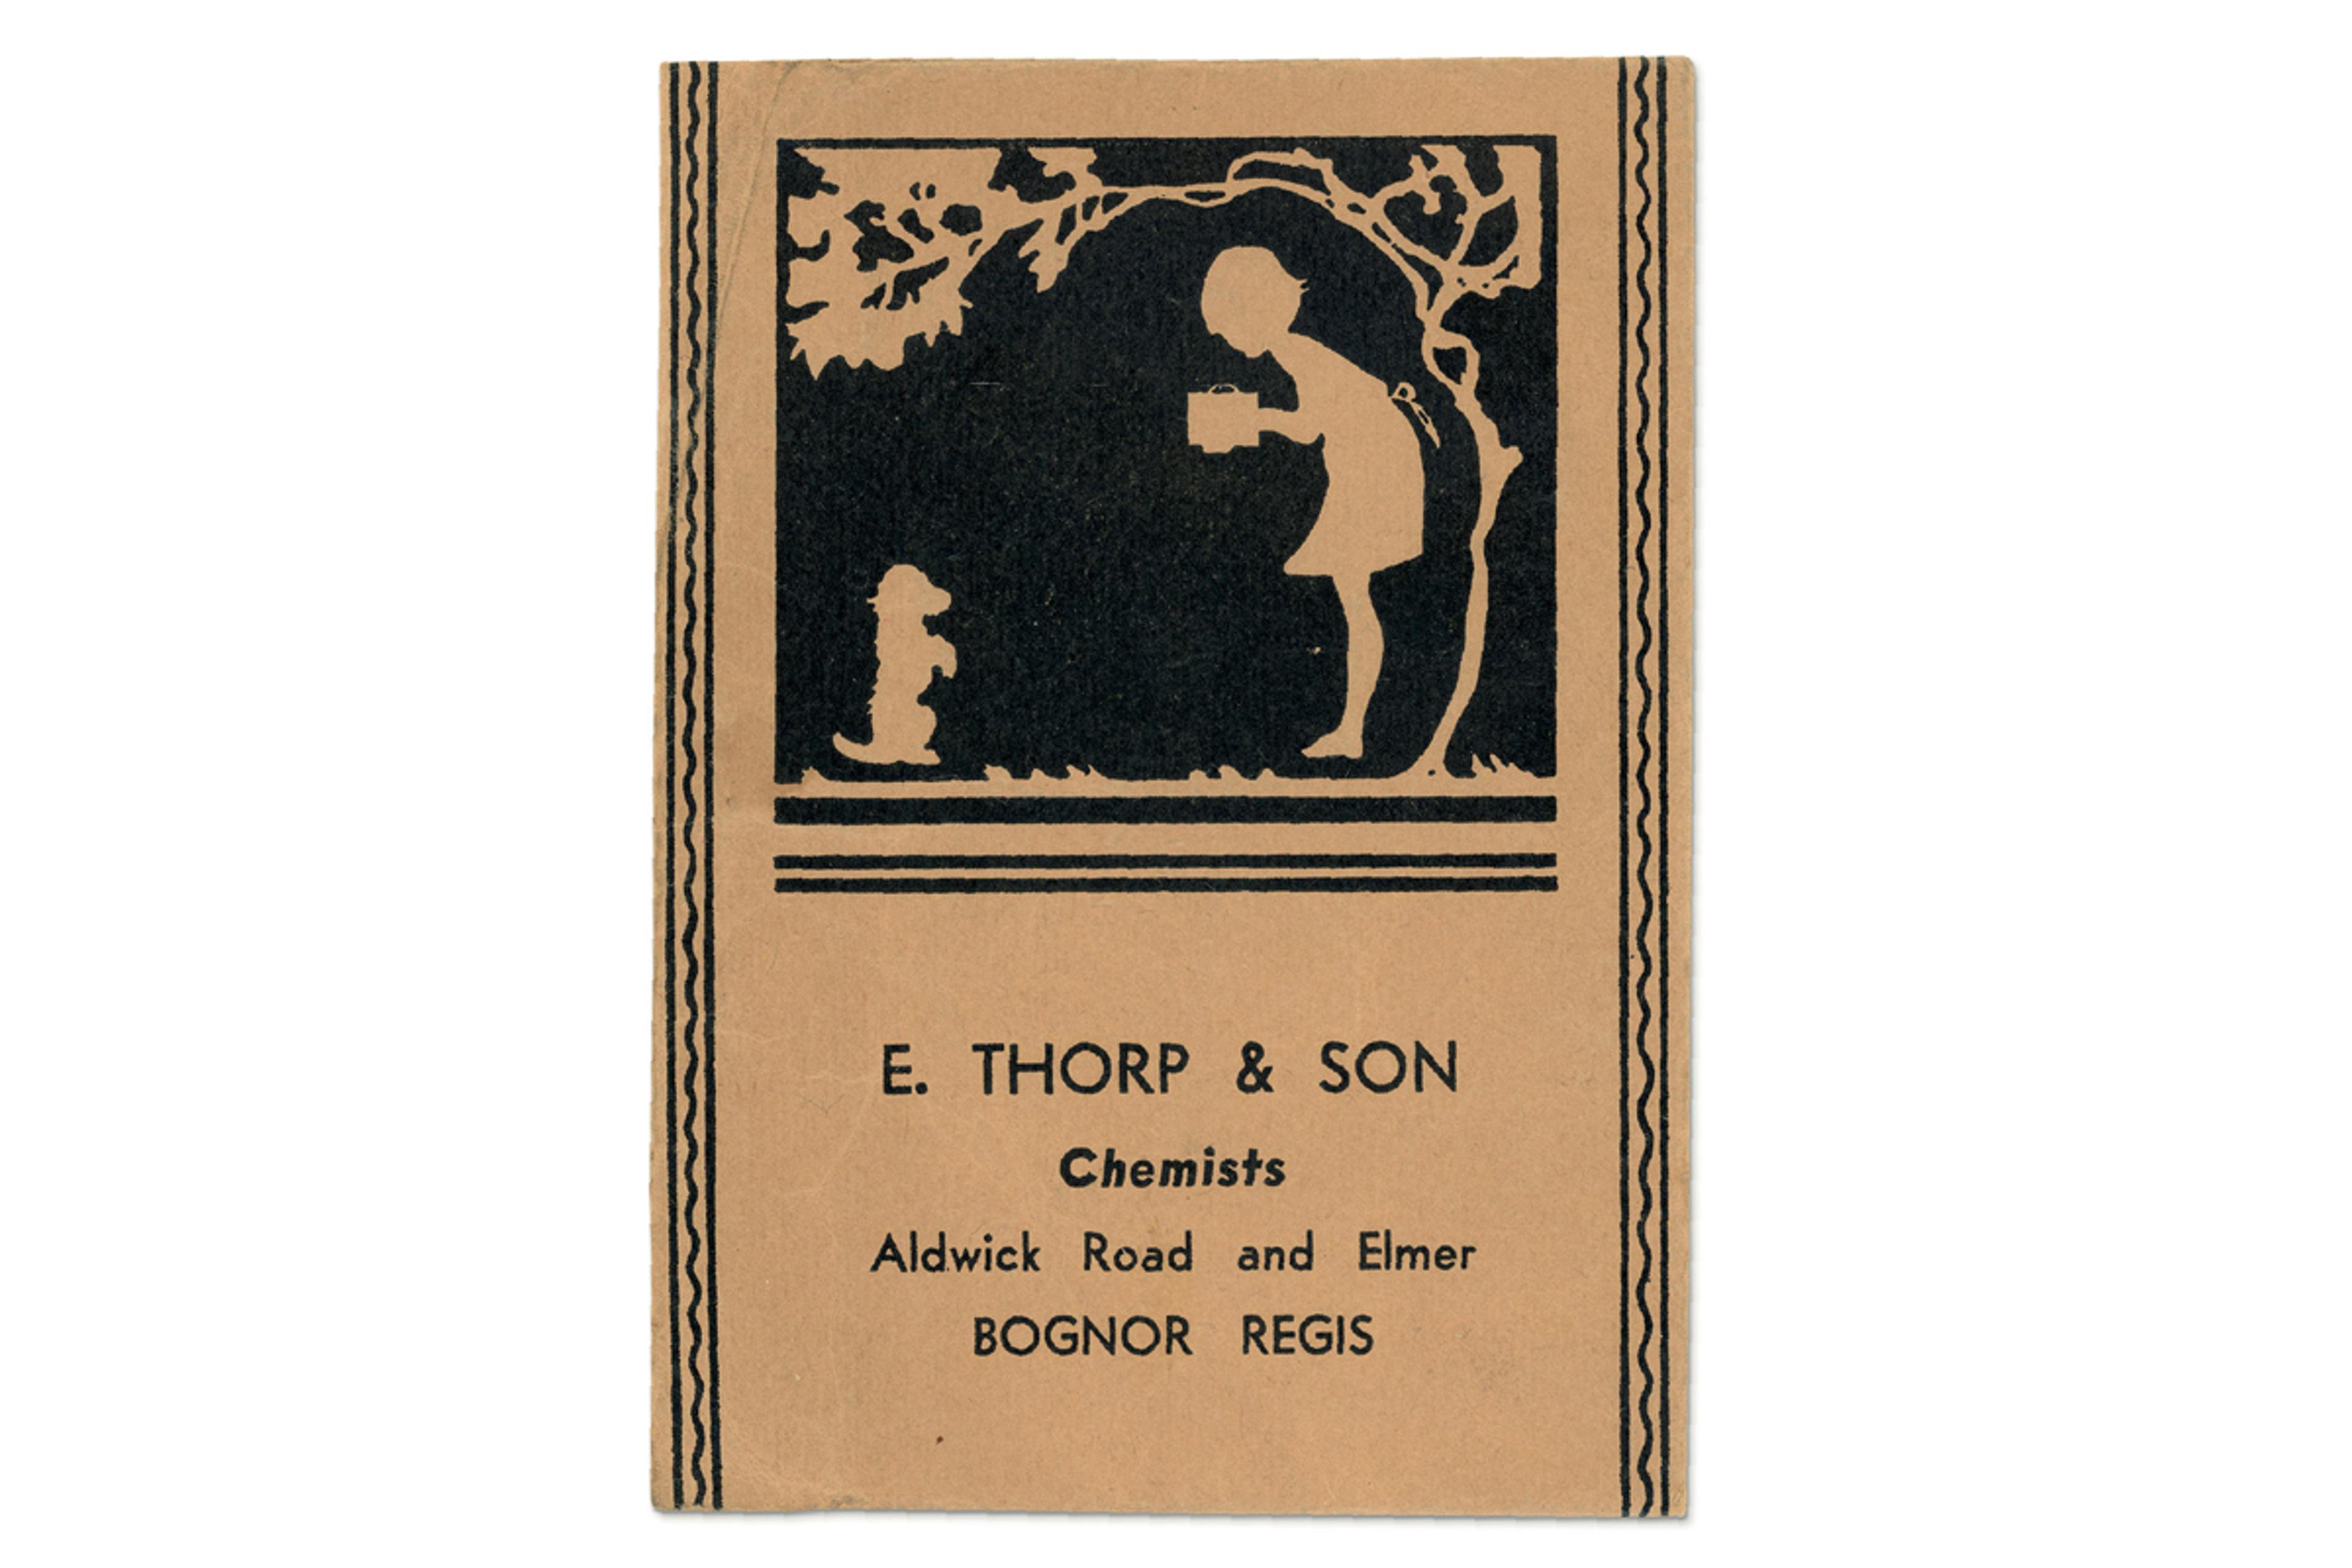 Photo of an envelope featuring a silhouette of a person taking a photograph of a dog by a tree, with the text 'E. Thorp & Son', 'Chemists', 'Aldwick Road and Elmer' and 'Bognor Regis.